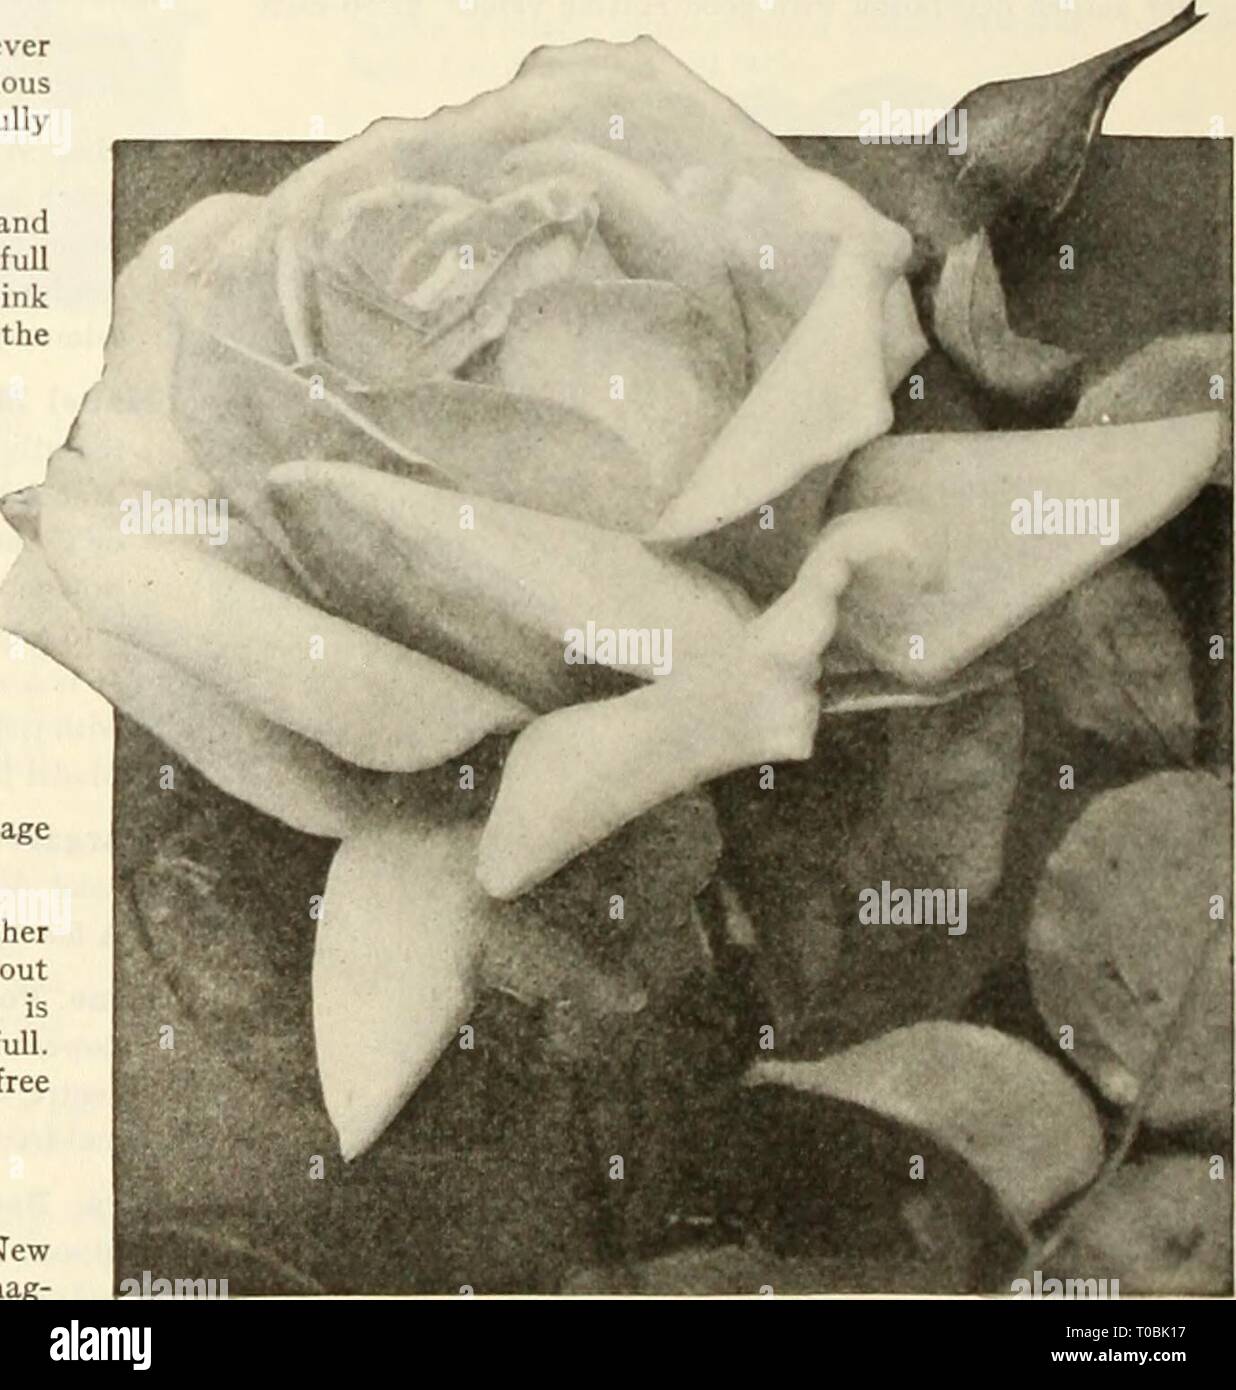 Dreer's garden book 1925 (1925) Dreer's garden book 1925 dreersgardenbook1925henr Year: 1925  Mrs. Charles Lamplough. page 128. $1.50 each. Described and offered on ^ Hybrid-Tea Rose, Mrs. J. C. Atosworth Reims. Large flowers of very regular and perfect form, petals round, very large, imbricated like a Camellia. Color flesh white, yellow at base, centre bright nankin shaded orange-apricot, vigorous habit and very free flowering. $2.50 each. Simone de Chevigne. Offered for the first time this season. A large attractive flower. Color cream shaded yellow and car- mine at the centre. $2.50 each. S Stock Photo